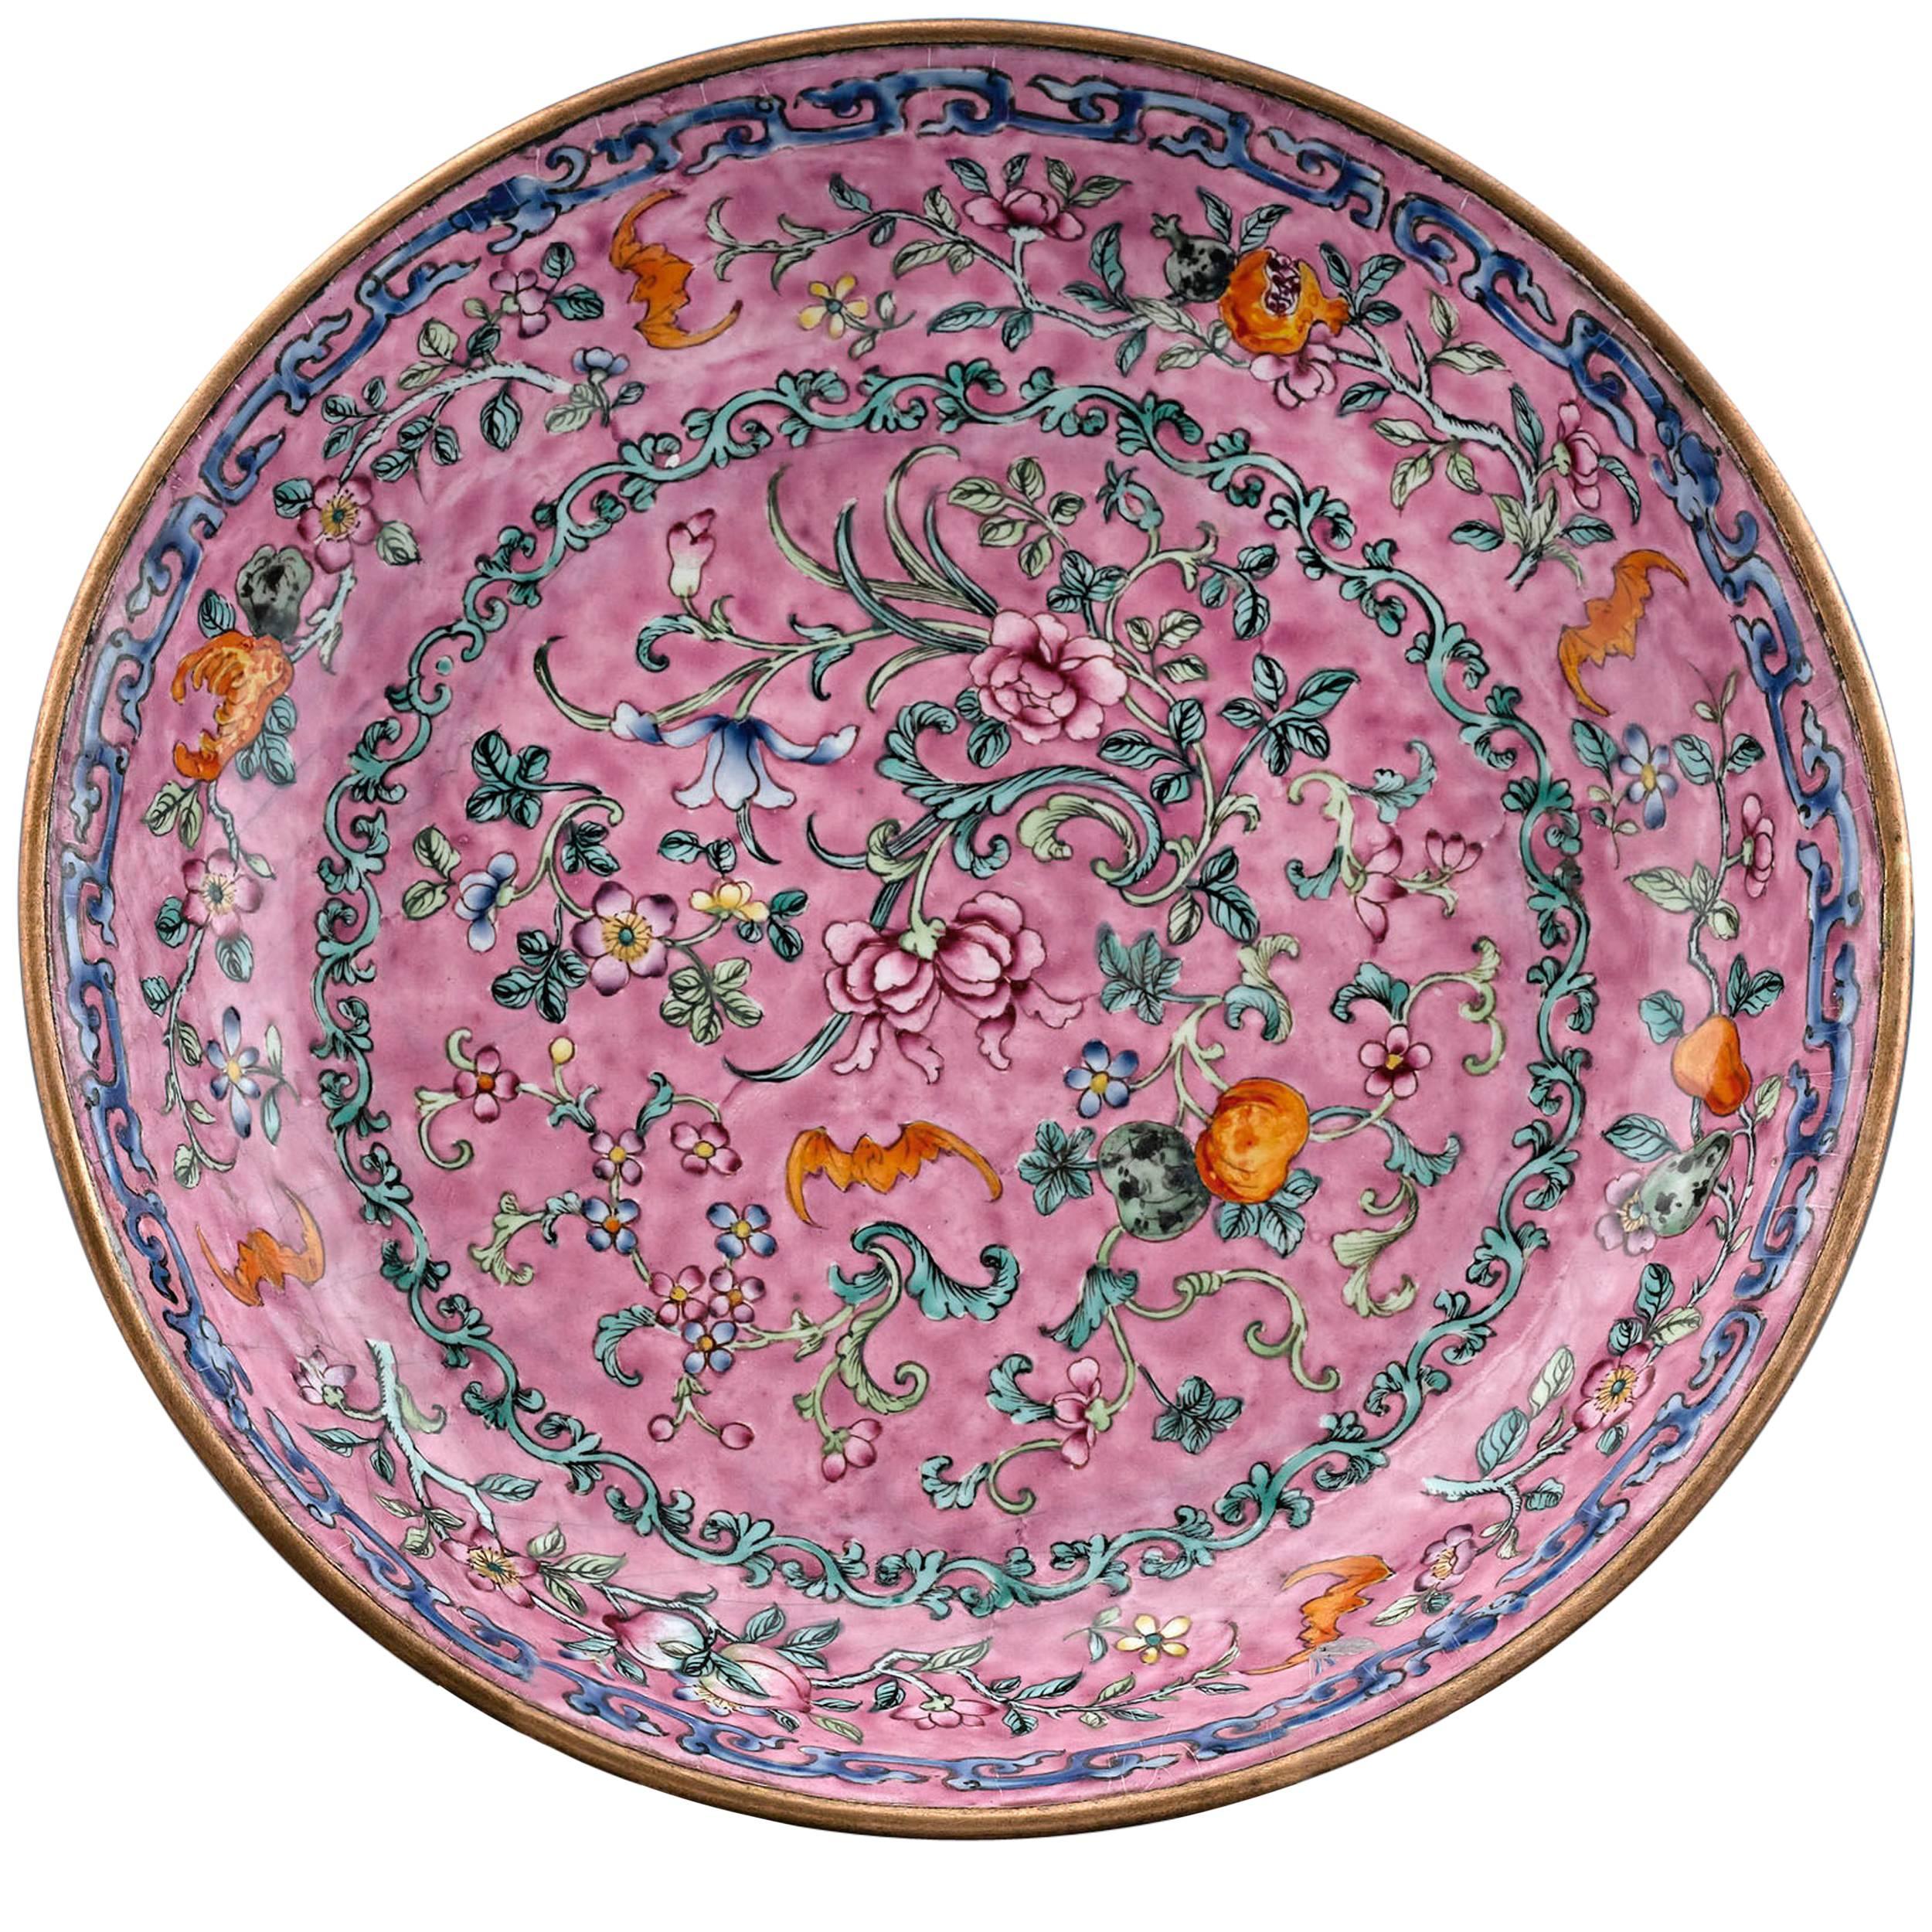 What is Chinese Canton porcelain?